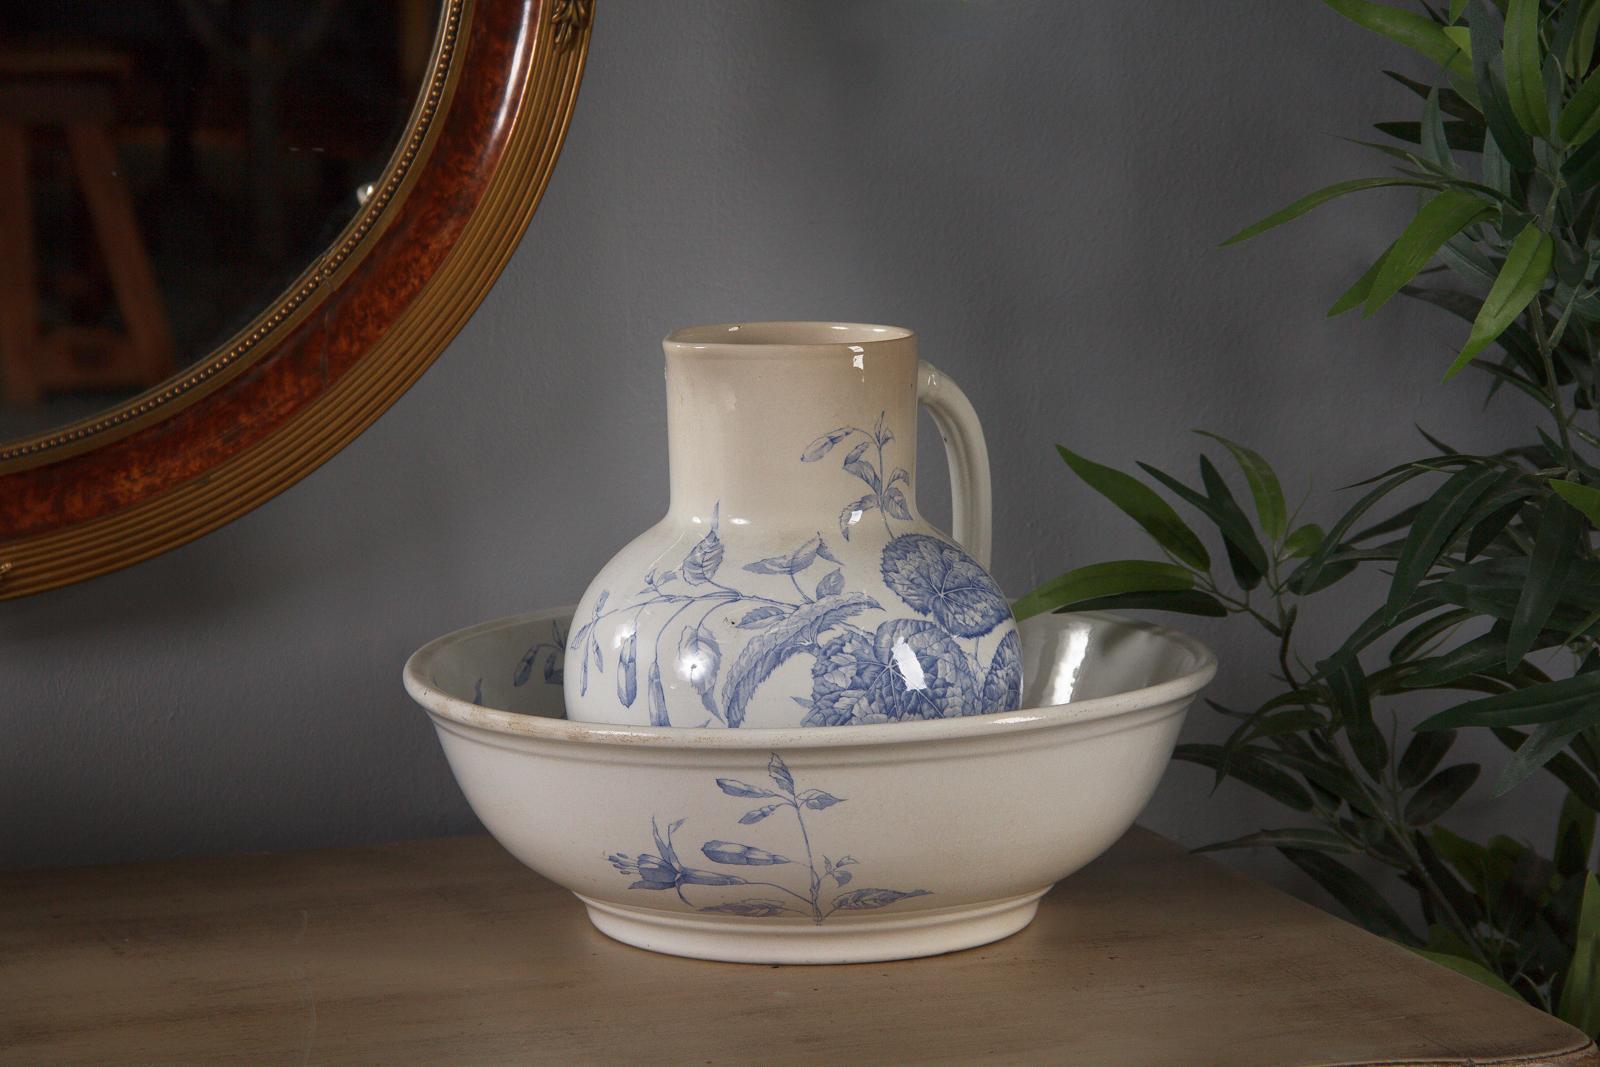 A blue and white pitcher and bowl from the Sarreguemines ceramic factory in Eastern France, circa 1920. White ceramic with indigo printed images of various flowers, detailed foliage and a single delicate butterfly. The wide bowl has foliate